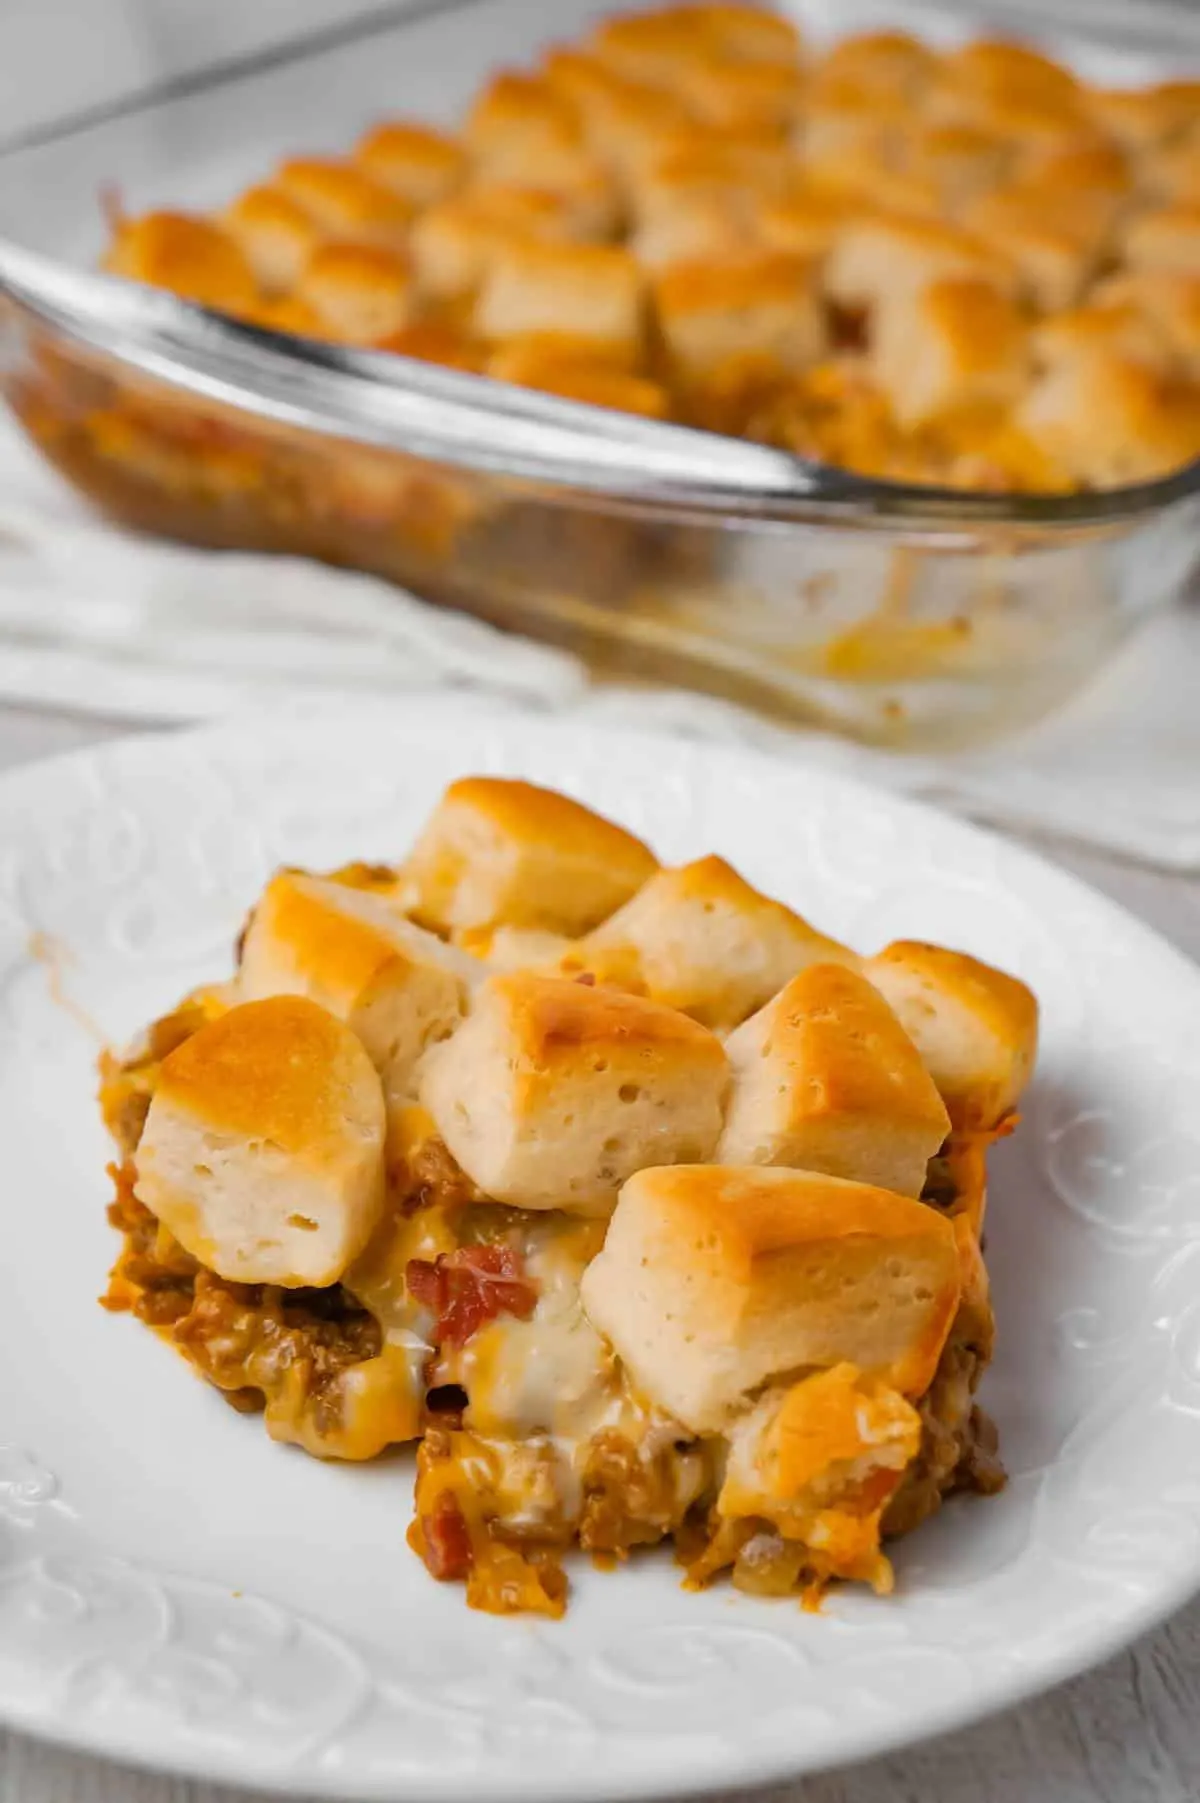 Bacon Cheeseburger Biscuit Casserole is an easy ground beef dinner recipe loaded with diced onions, condensed cheddar cheese soup, ketchup, mustard, crumbled bacon and shredded cheese all topped with pieces of Pillsbury biscuits.